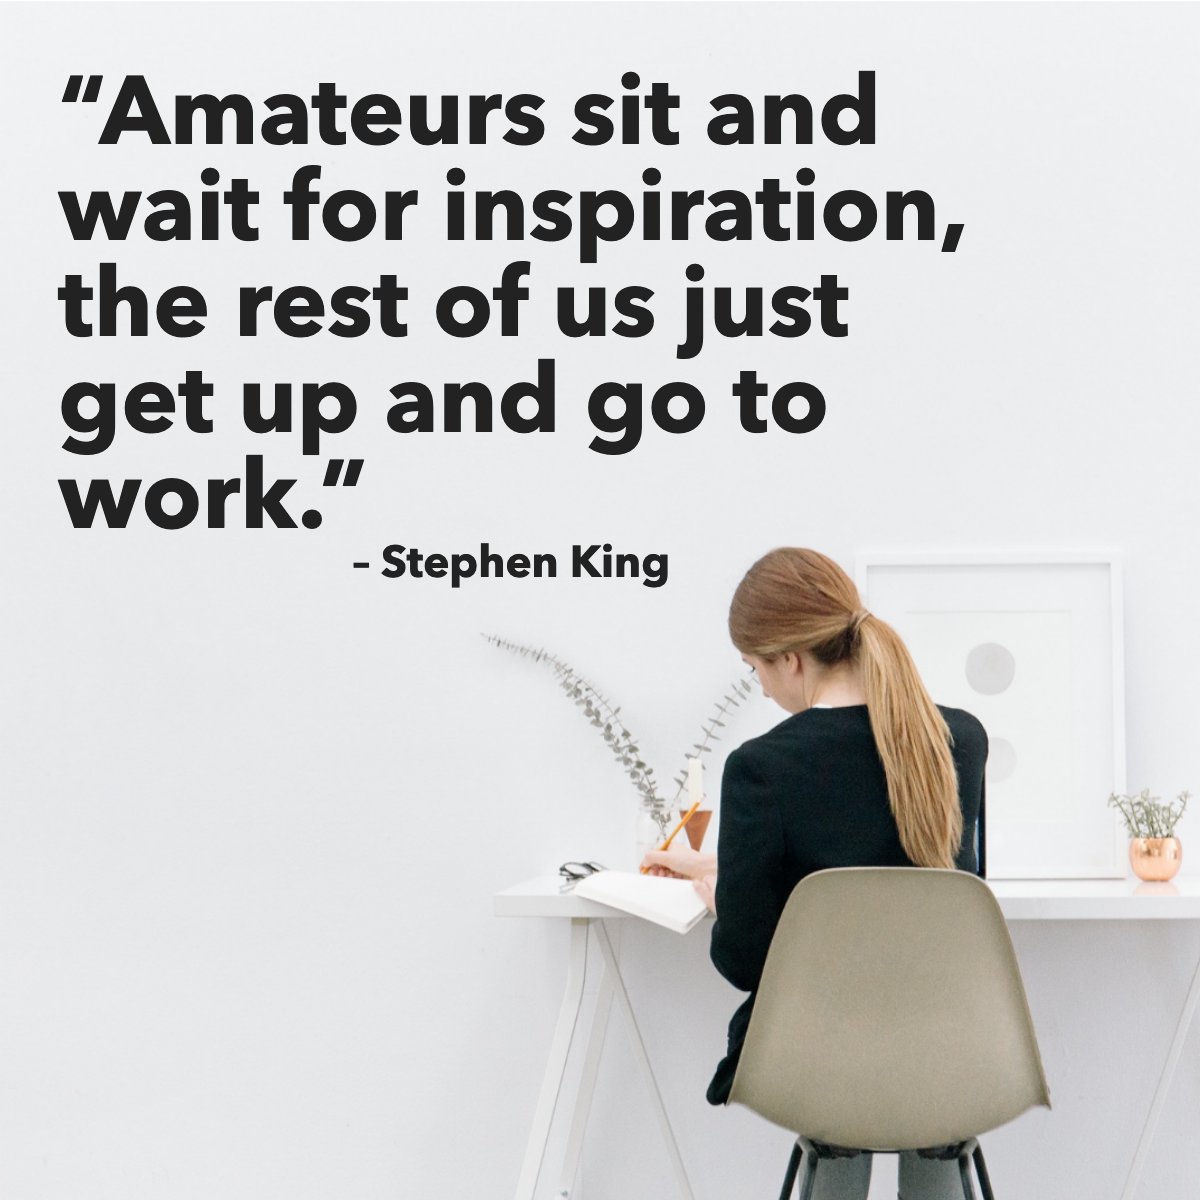 What makes you feel inspired? ✍👨‍💻

#workinspirations #working #inspirationalquote
 #whoyouworkwithmatters